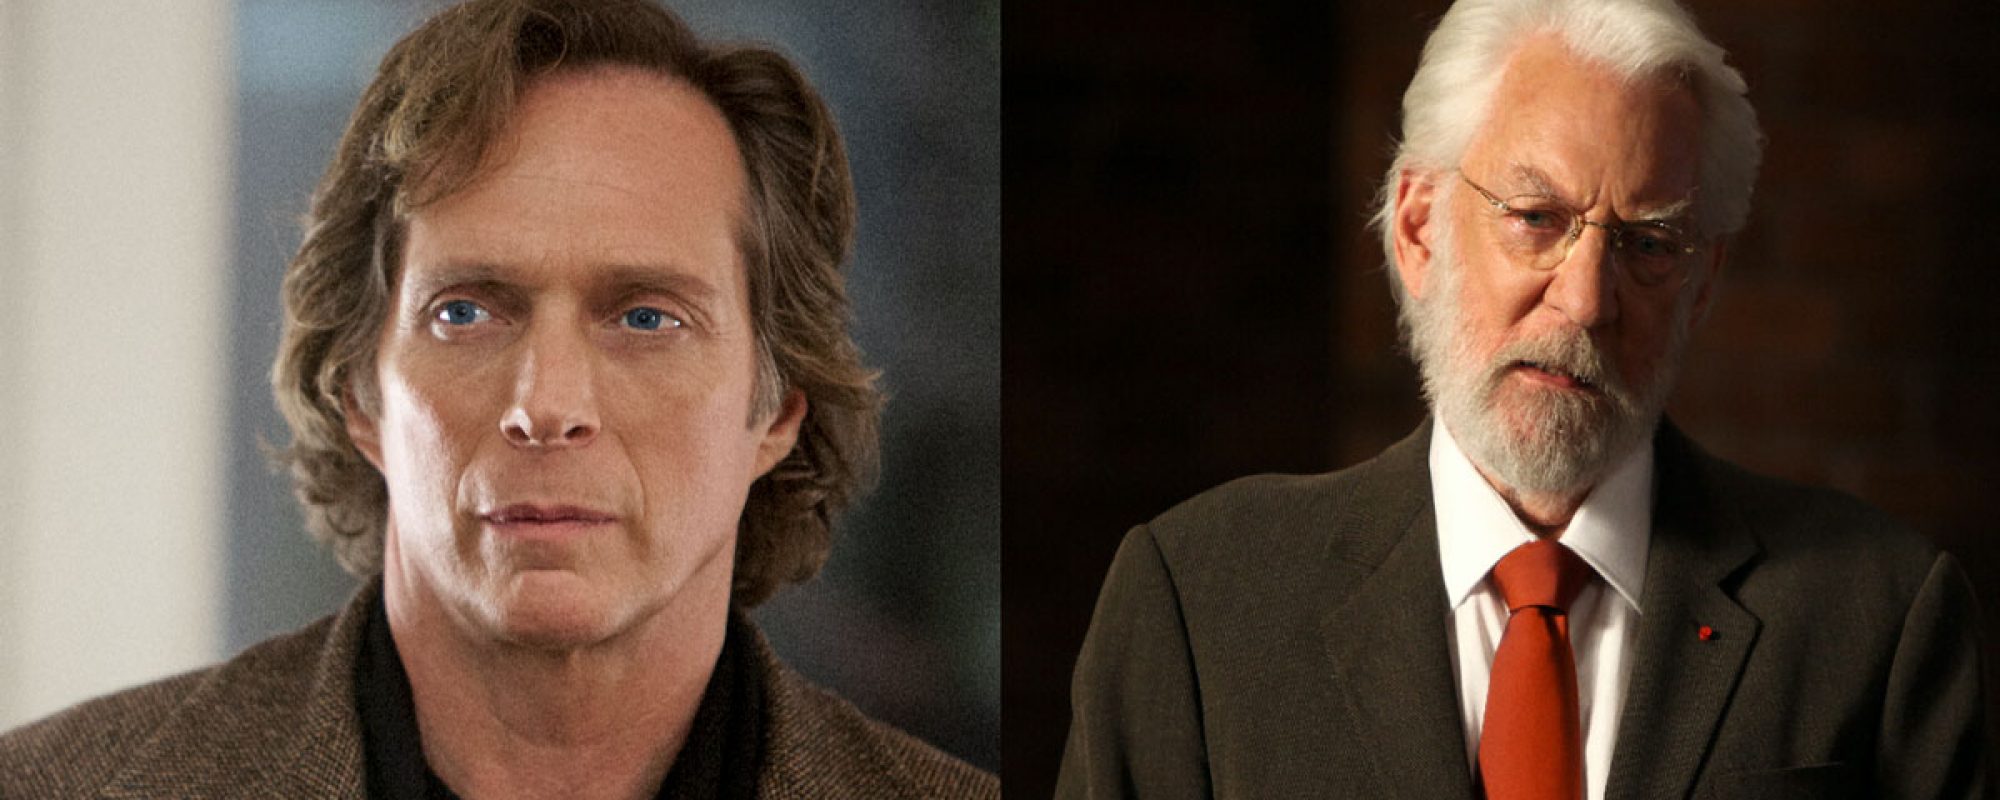 DONALD SUTHERLAND AND WILLIAM FICHTNER COME TO OVATION TV WITH CROSSING LINES AIRING ON MONDAY NIGHTS